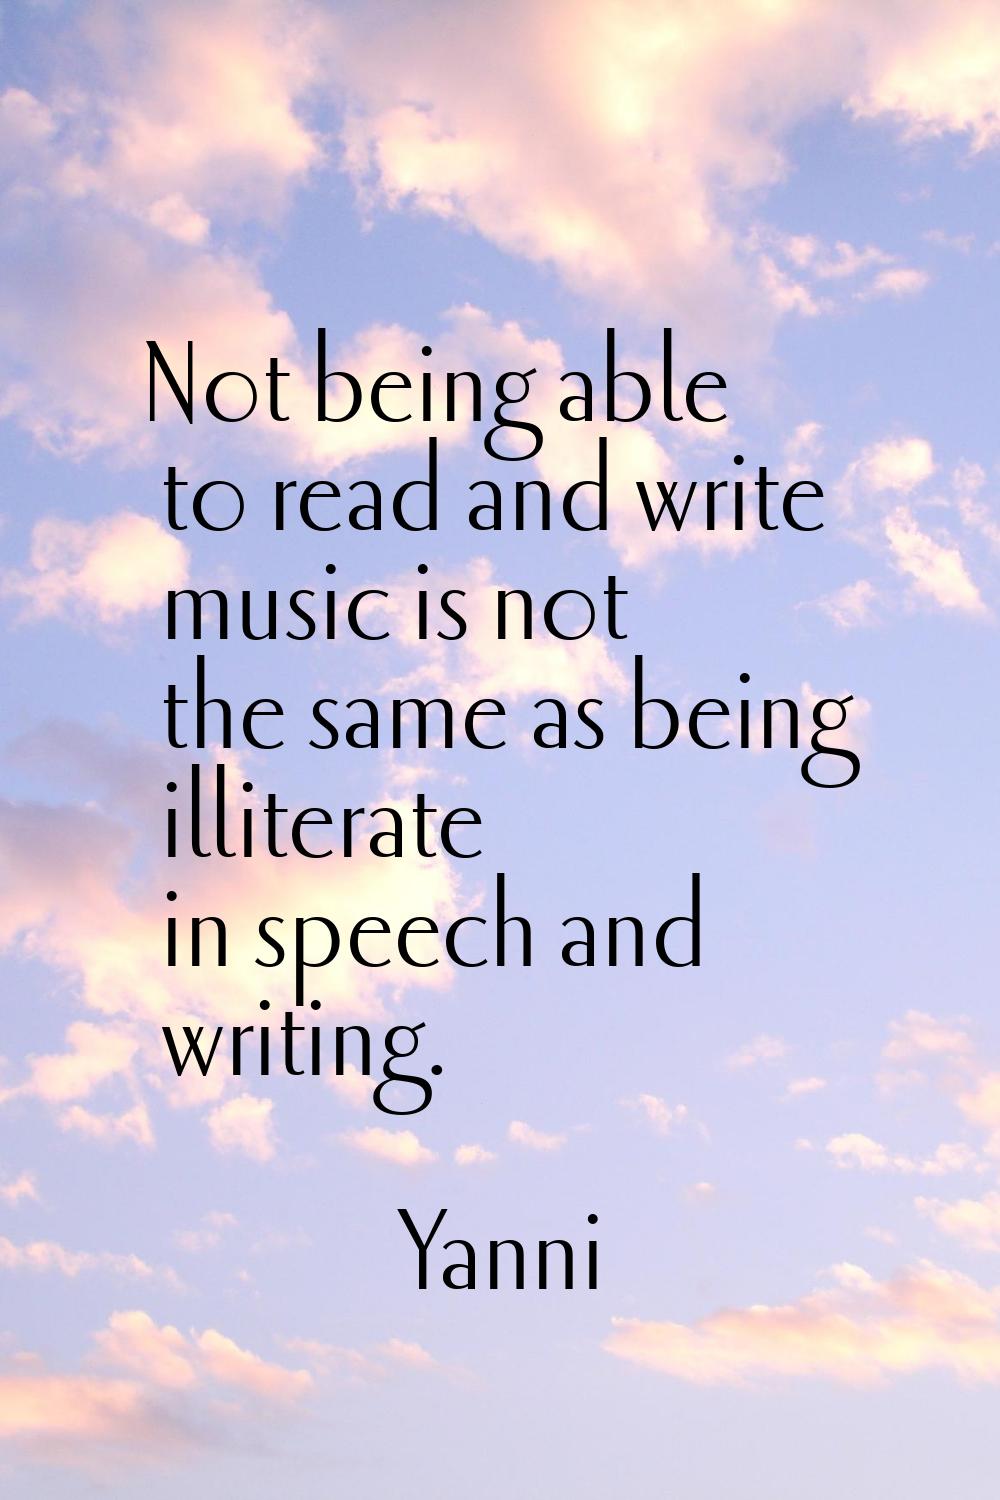 Not being able to read and write music is not the same as being illiterate in speech and writing.